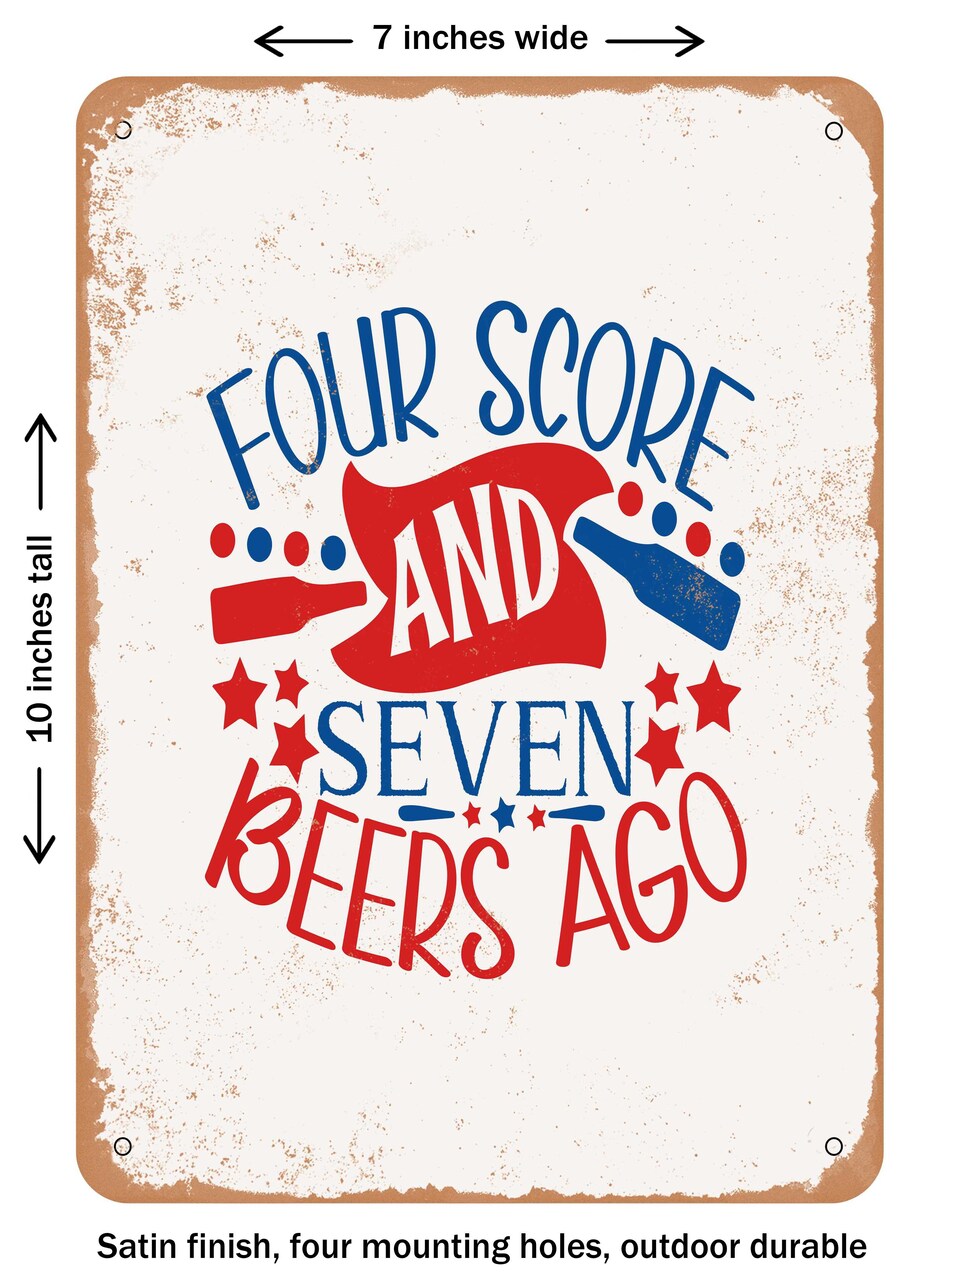 DECORATIVE METAL SIGN - Four Score and Seven Beers Ago - 2  - Vintage Rusty Look